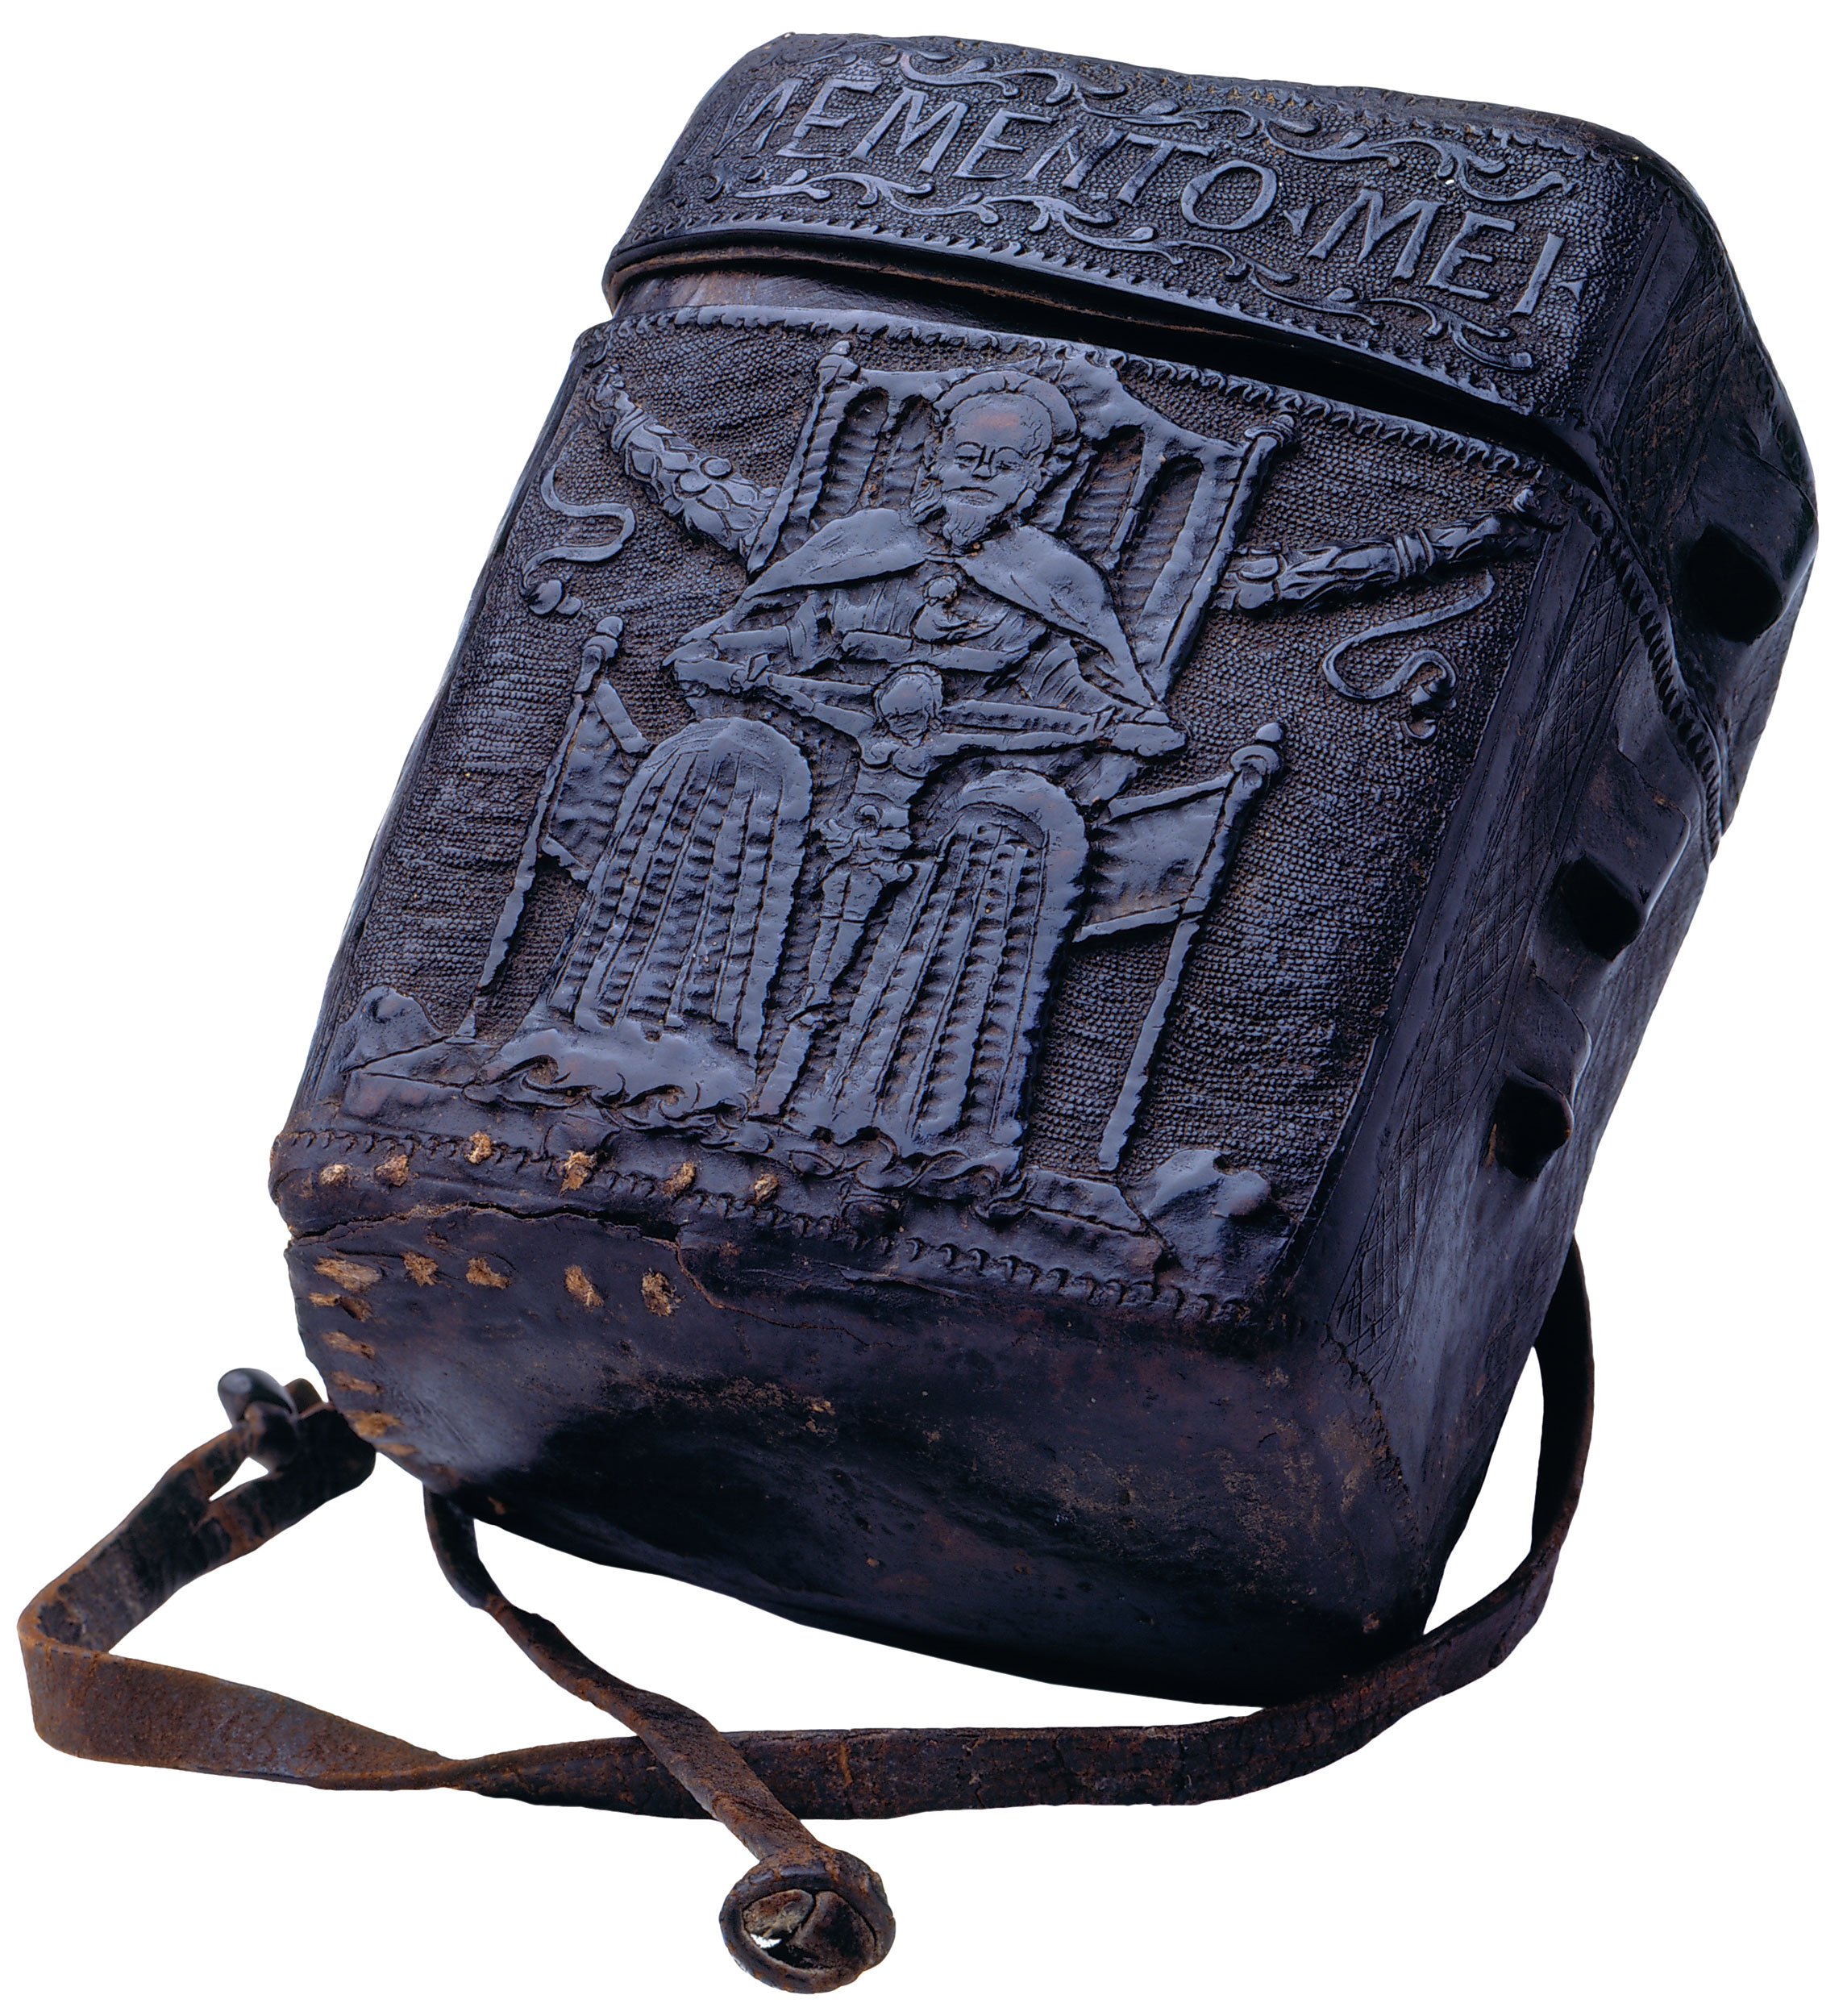 A black leather book box from Italy. Ca. 1465-1485 CE, now housed at the Morgan Library & Museum in Manhattan.jpg